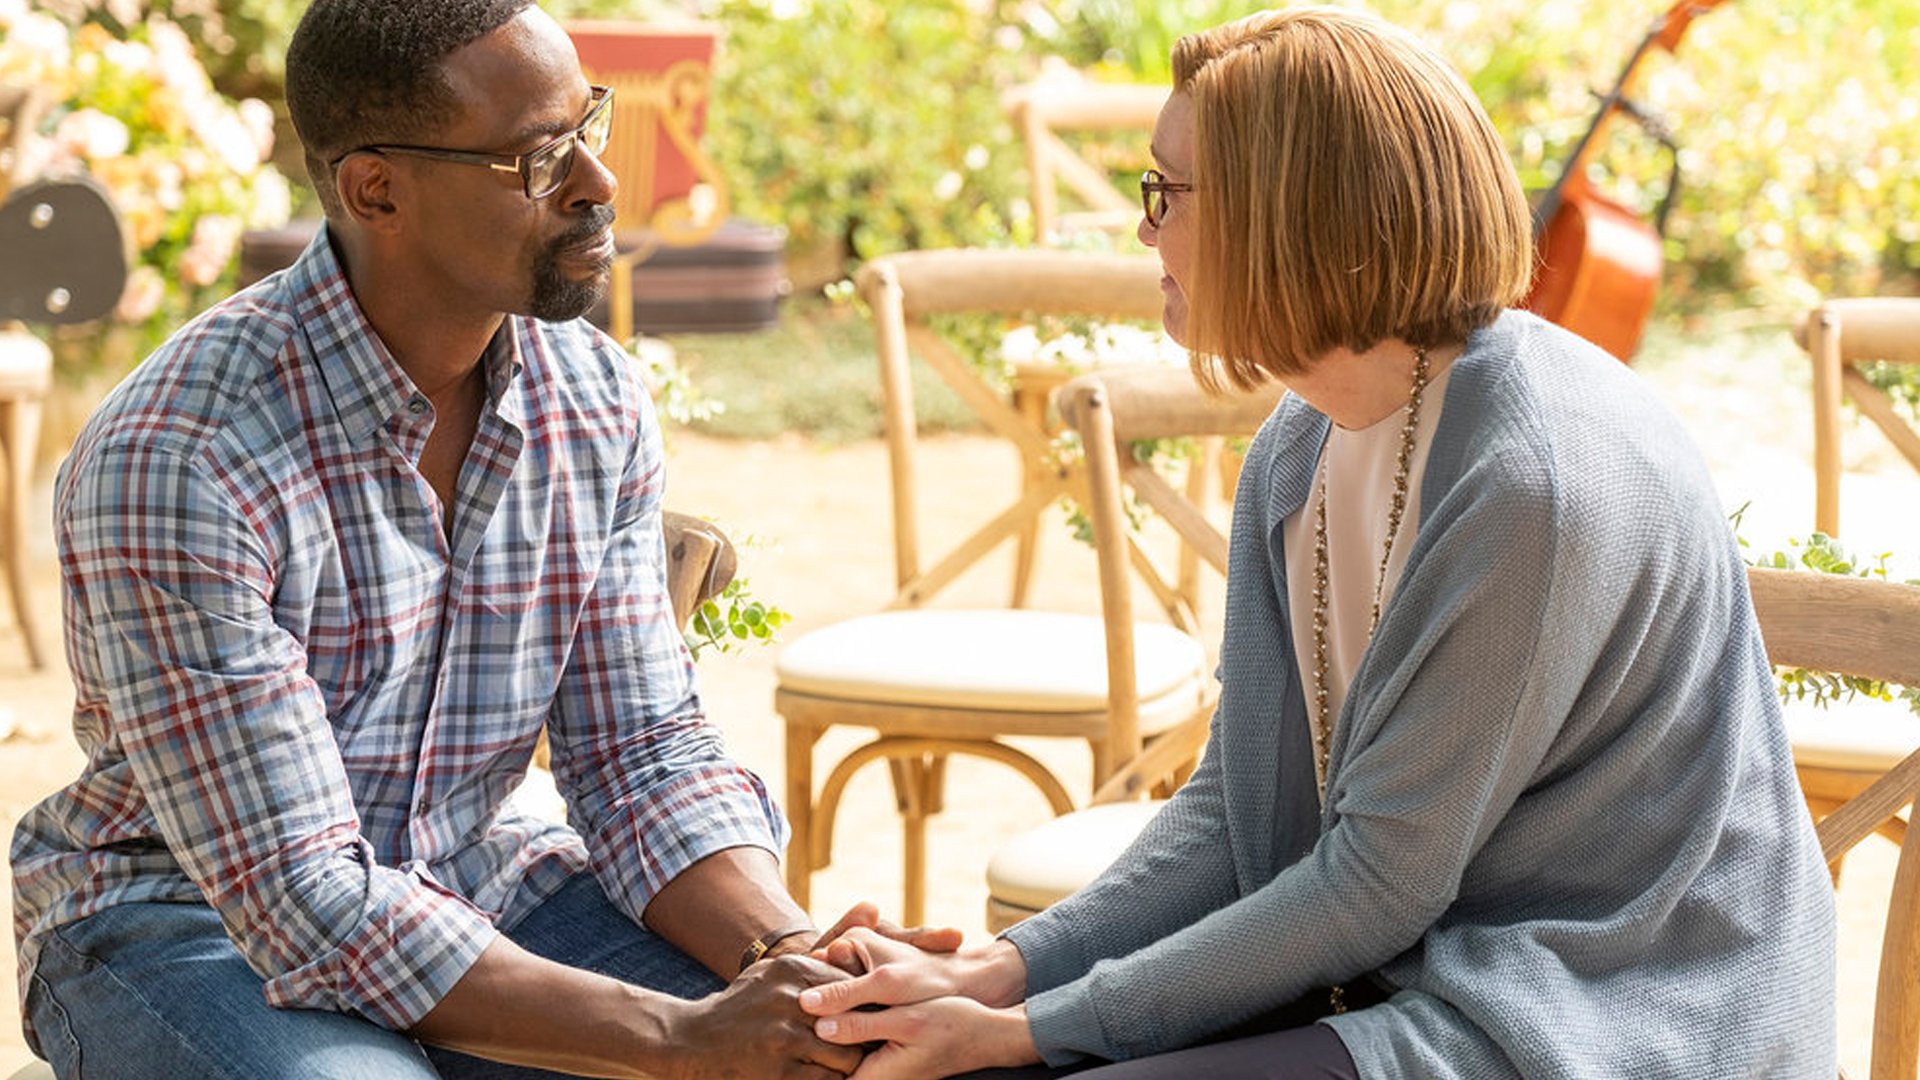 Sterling K. Brown as Randall and Mandy Moore as Rebecca holding hands in the ‘This Is Us’ Season 5 finale, episode 16, ‘The Adirondacks’